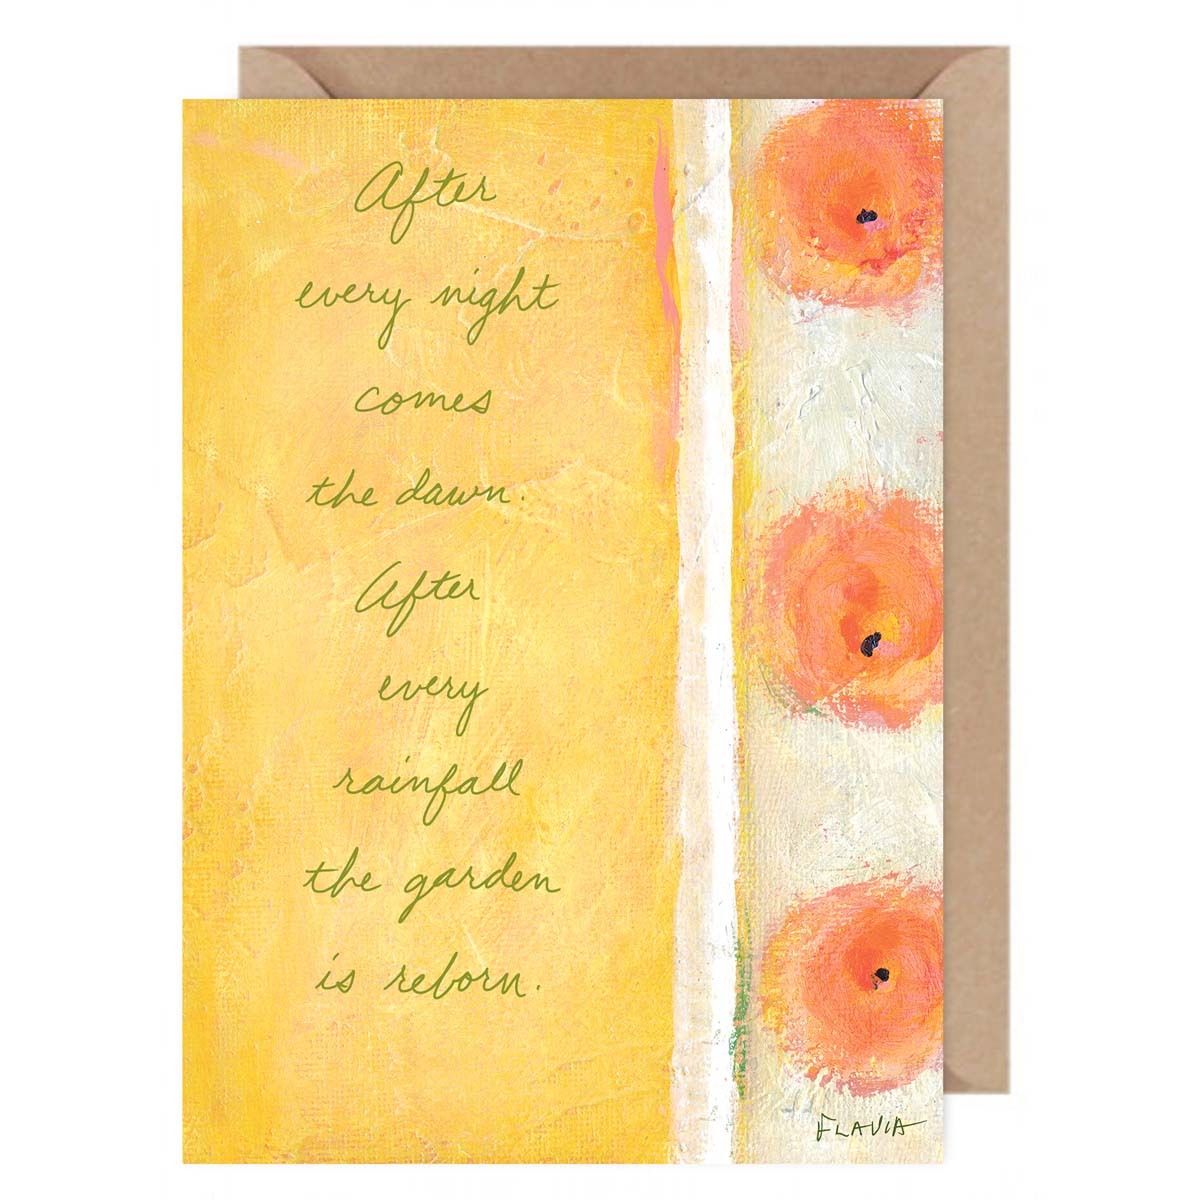 After Every Night Comes Dawn  - a Flavia Weedn inspirational greeting card  0101-0007